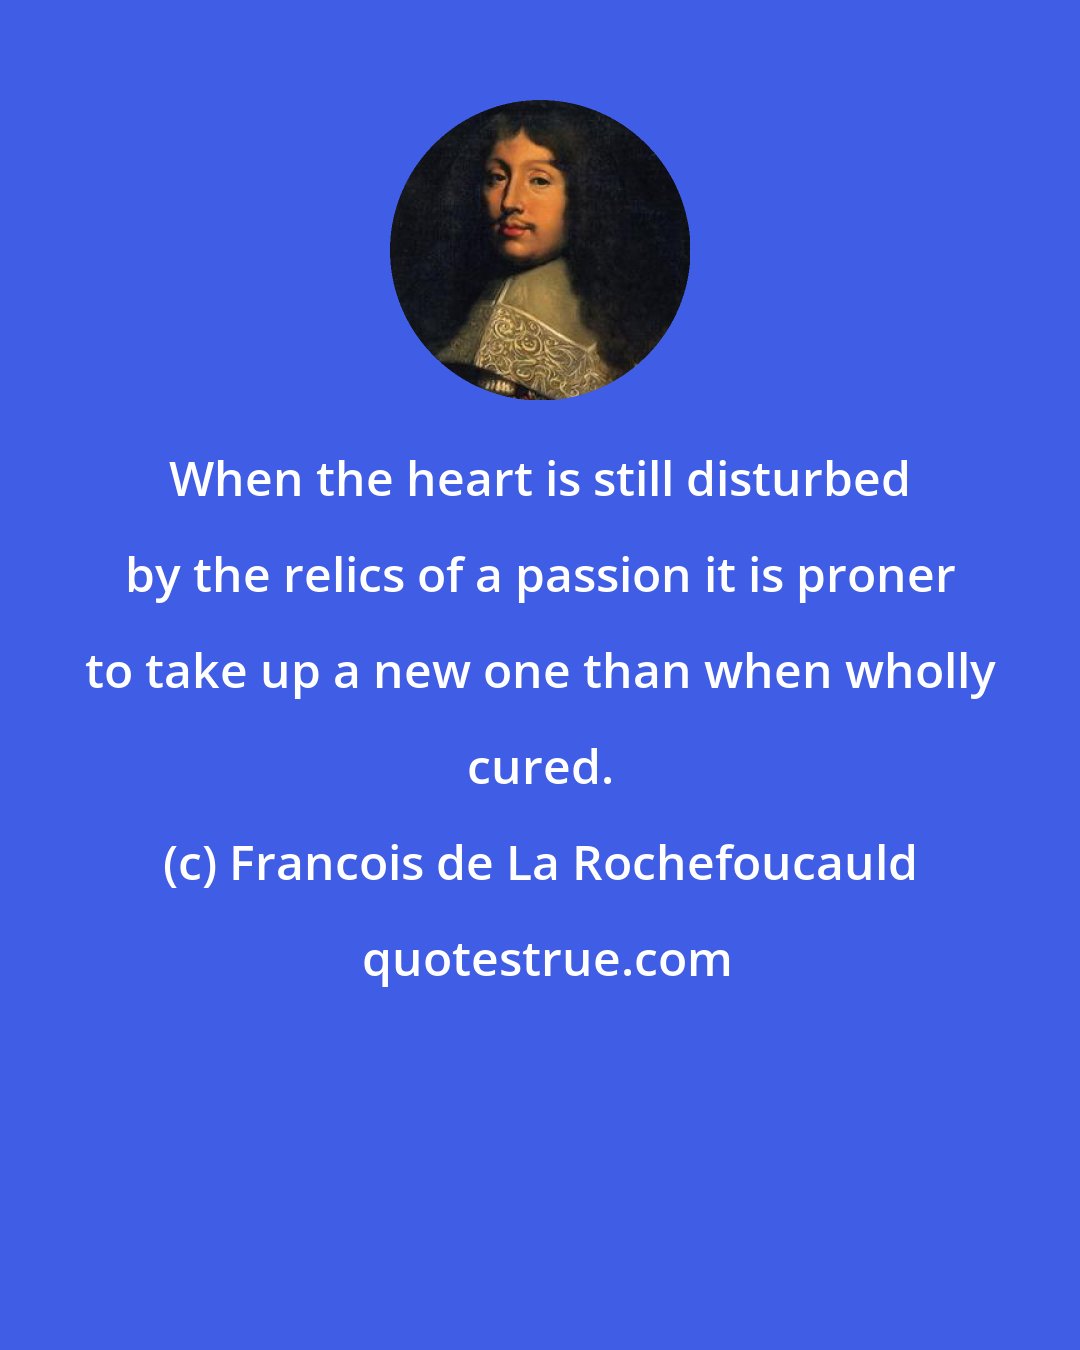 Francois de La Rochefoucauld: When the heart is still disturbed by the relics of a passion it is proner to take up a new one than when wholly cured.